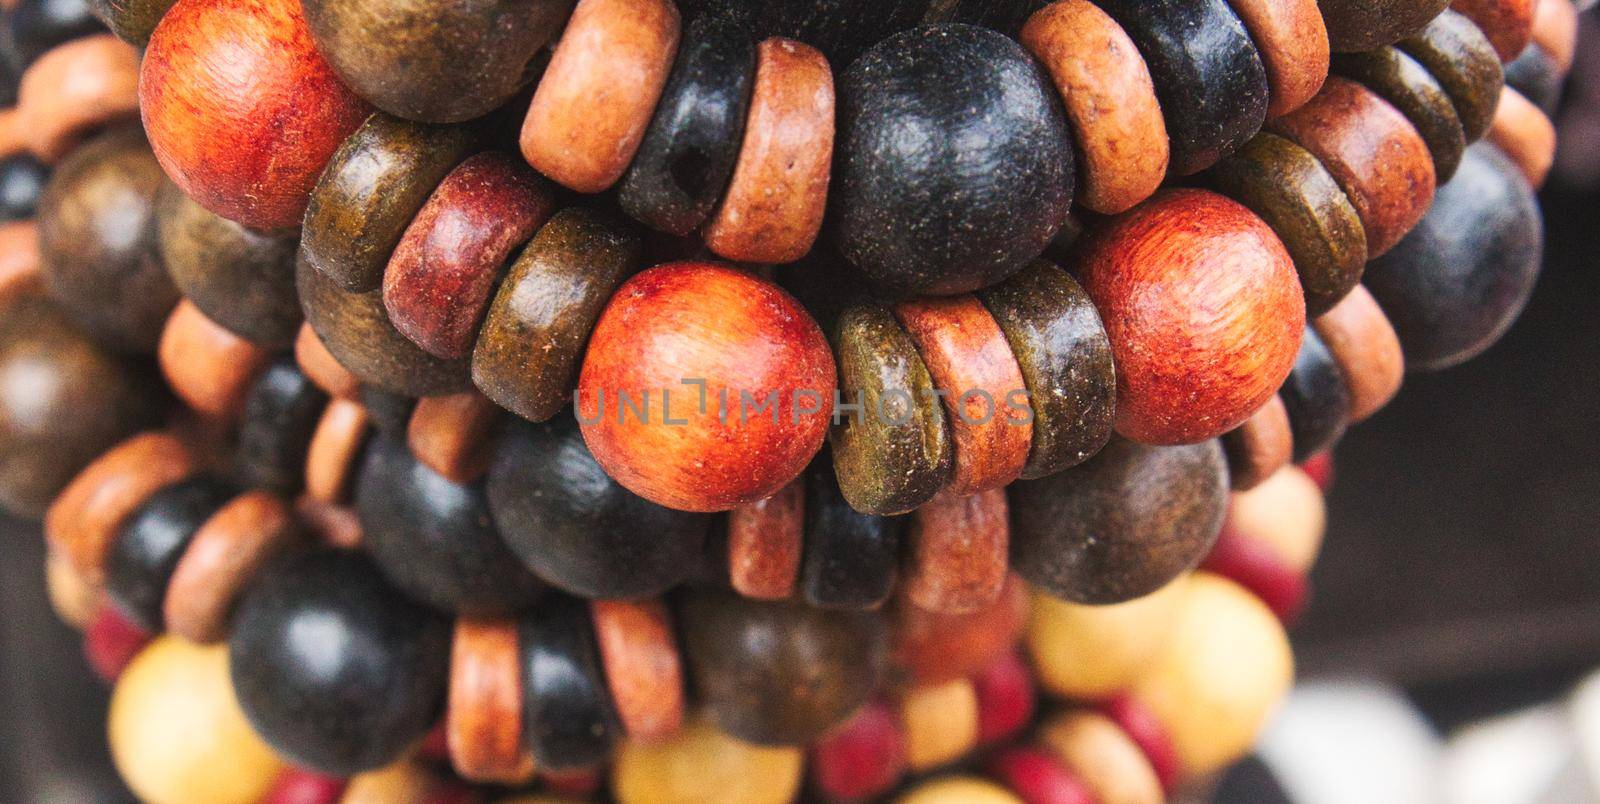 Coloured artisan wooden bead bracelets on display as ethnic jewellery by tennesseewitney